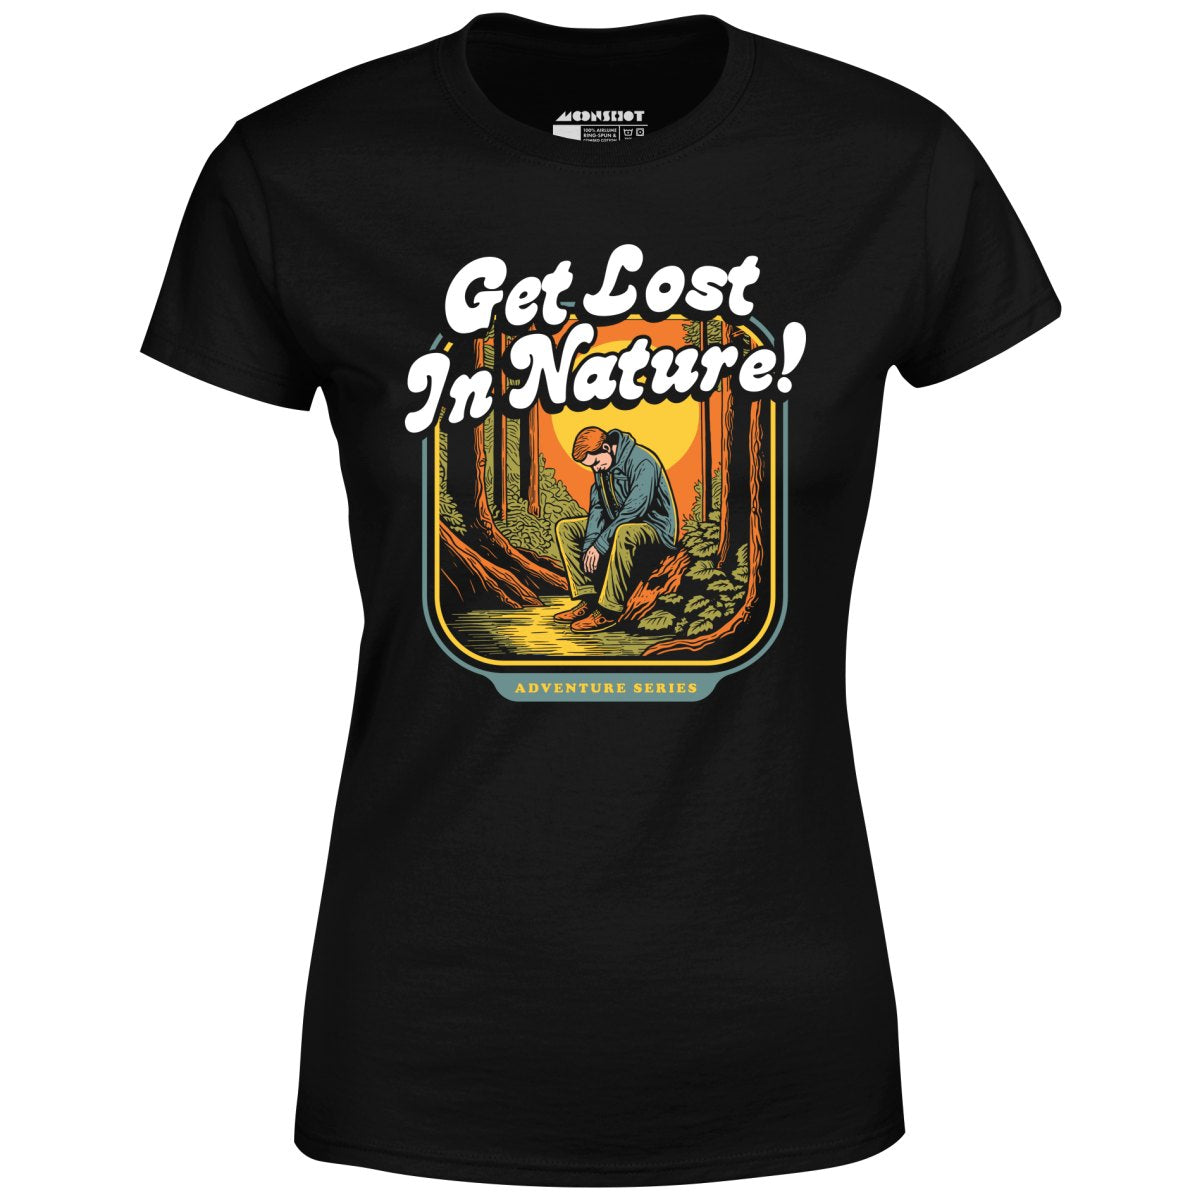 Get Lost in Nature - Women's T-Shirt